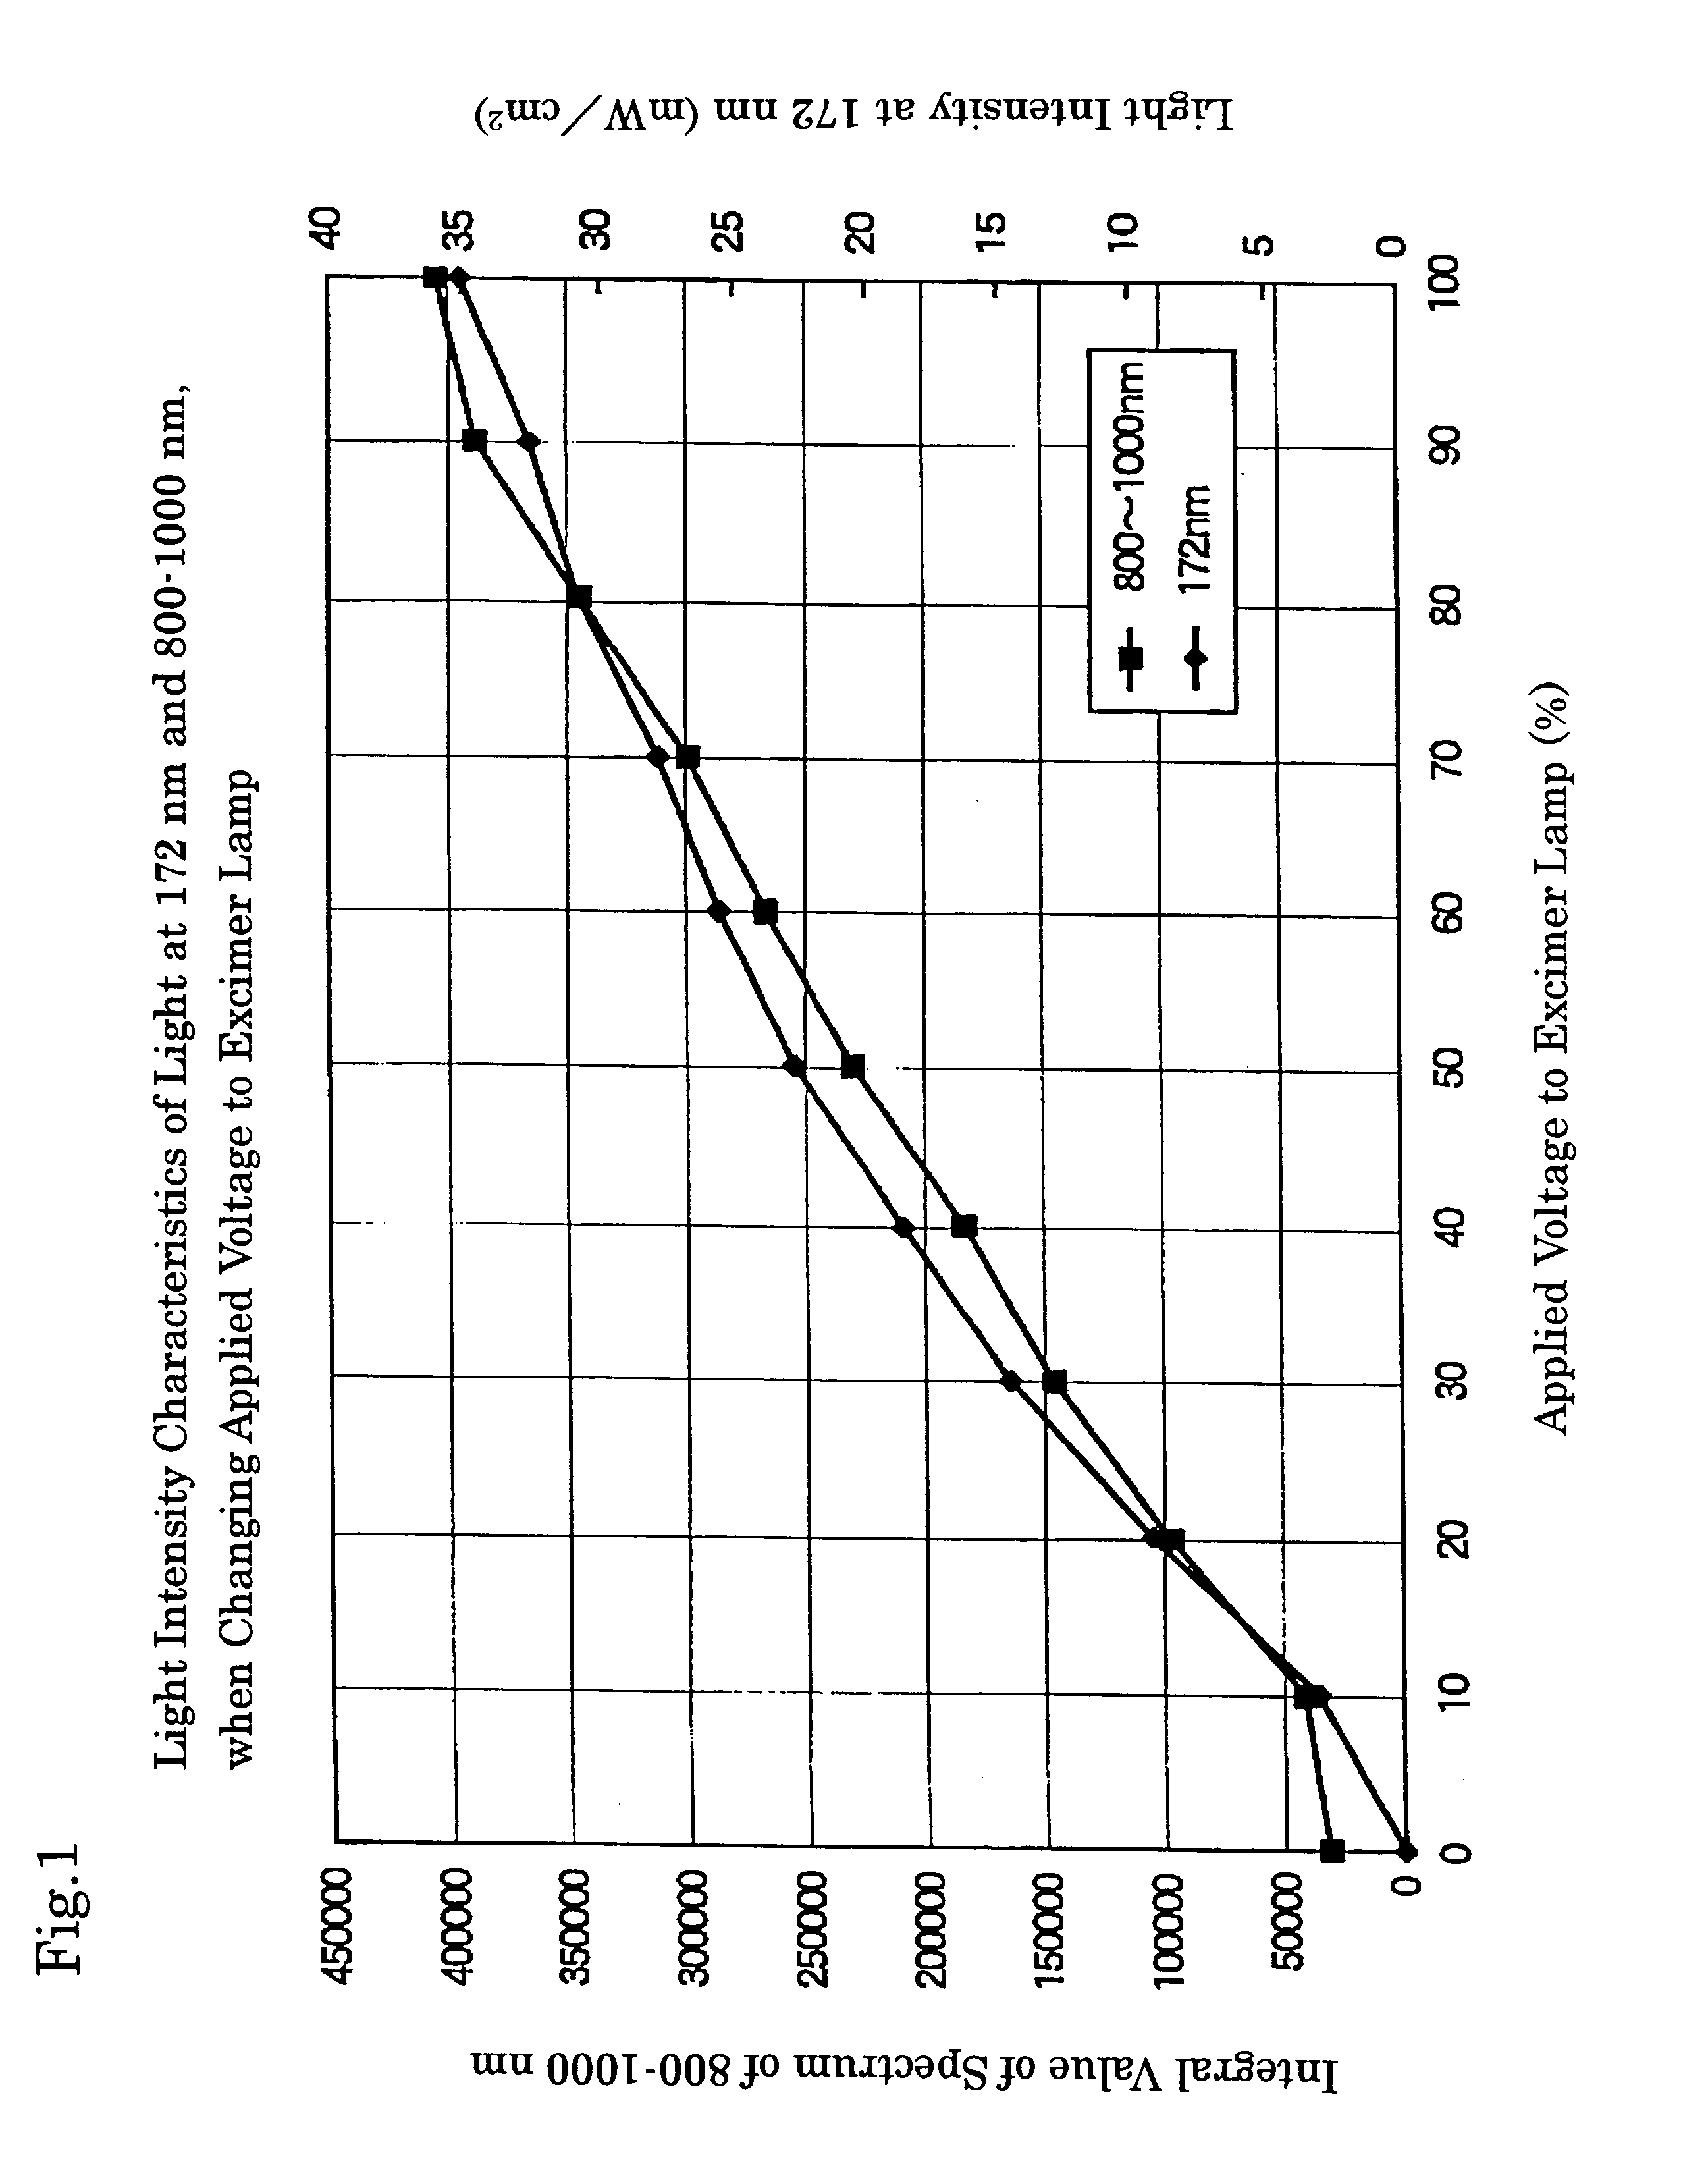 Apparatus for measuring light intensity of excimer lamp